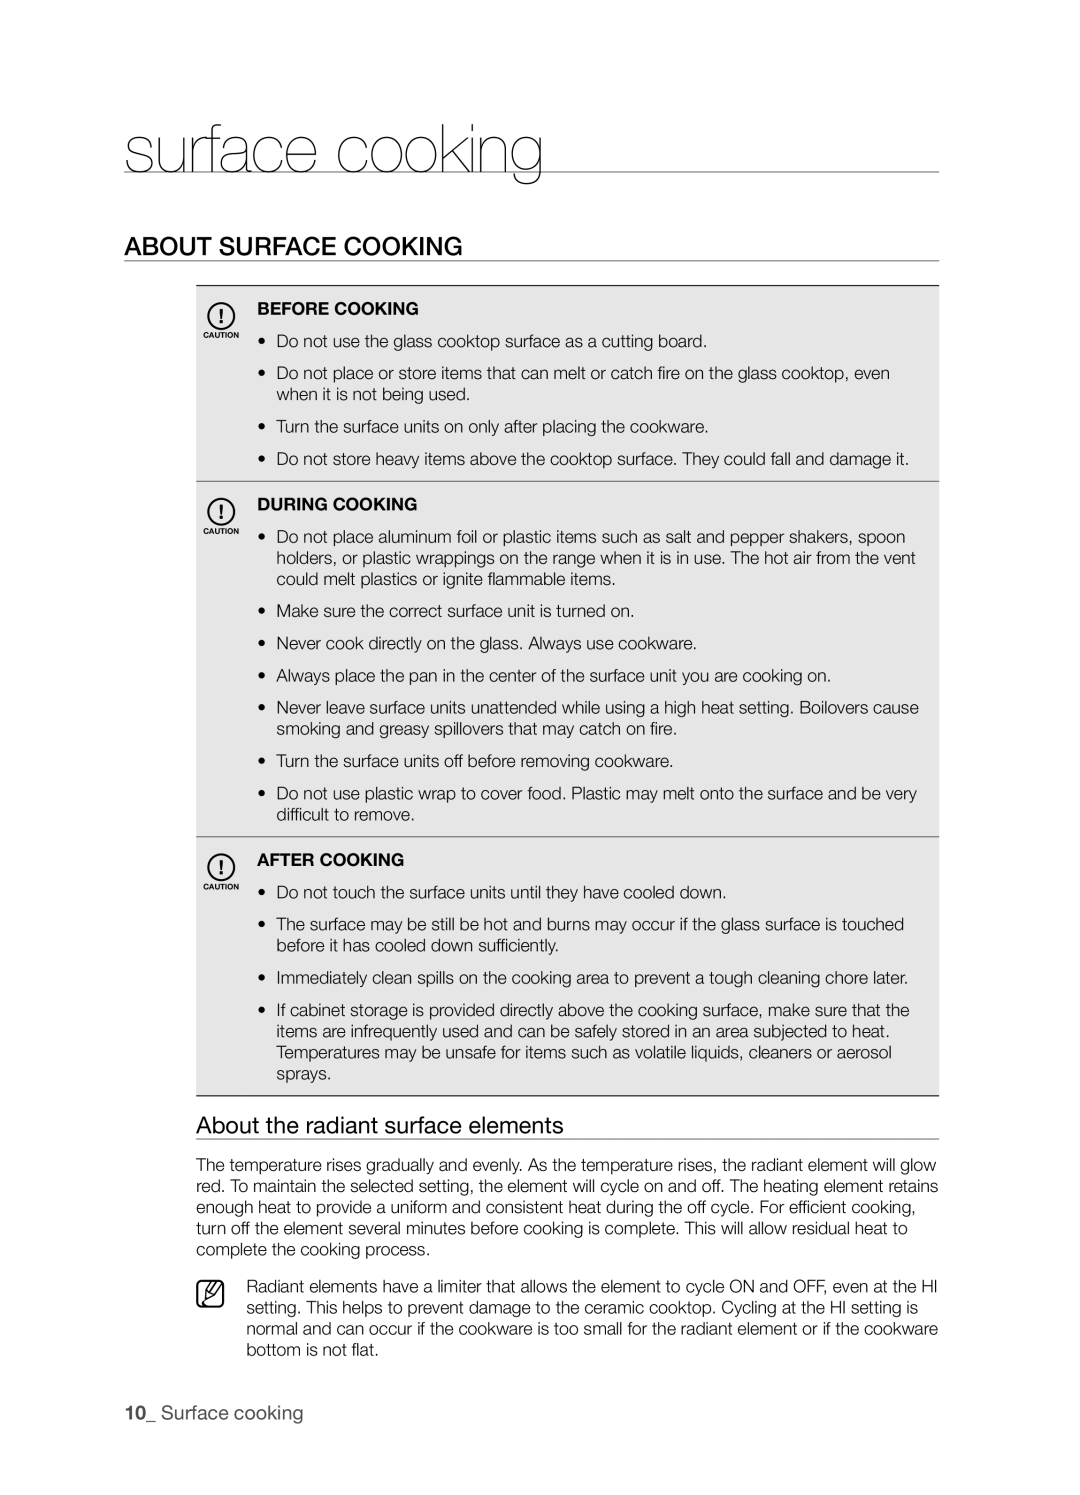 Samsung FTQ352IWUW, FTQ352IWUB, FTQ352IWUX About surface cooking, About the radiant surface elements, Surface cooking 